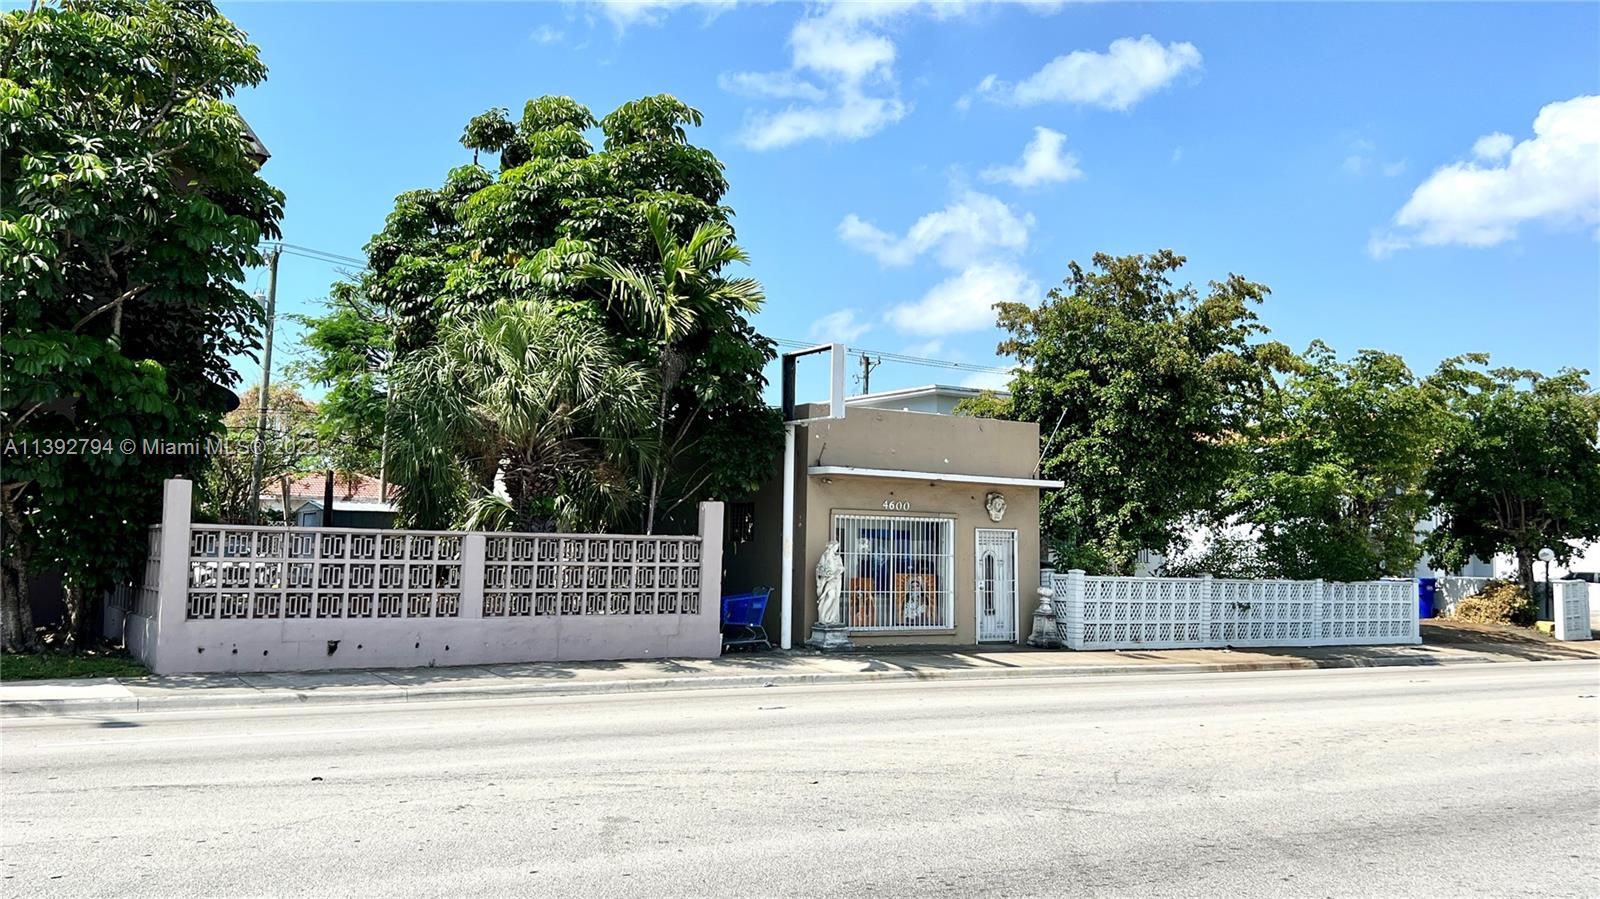 Retail For Sale ON THE ONE OF BUSIEST STREETS IN MIAMI